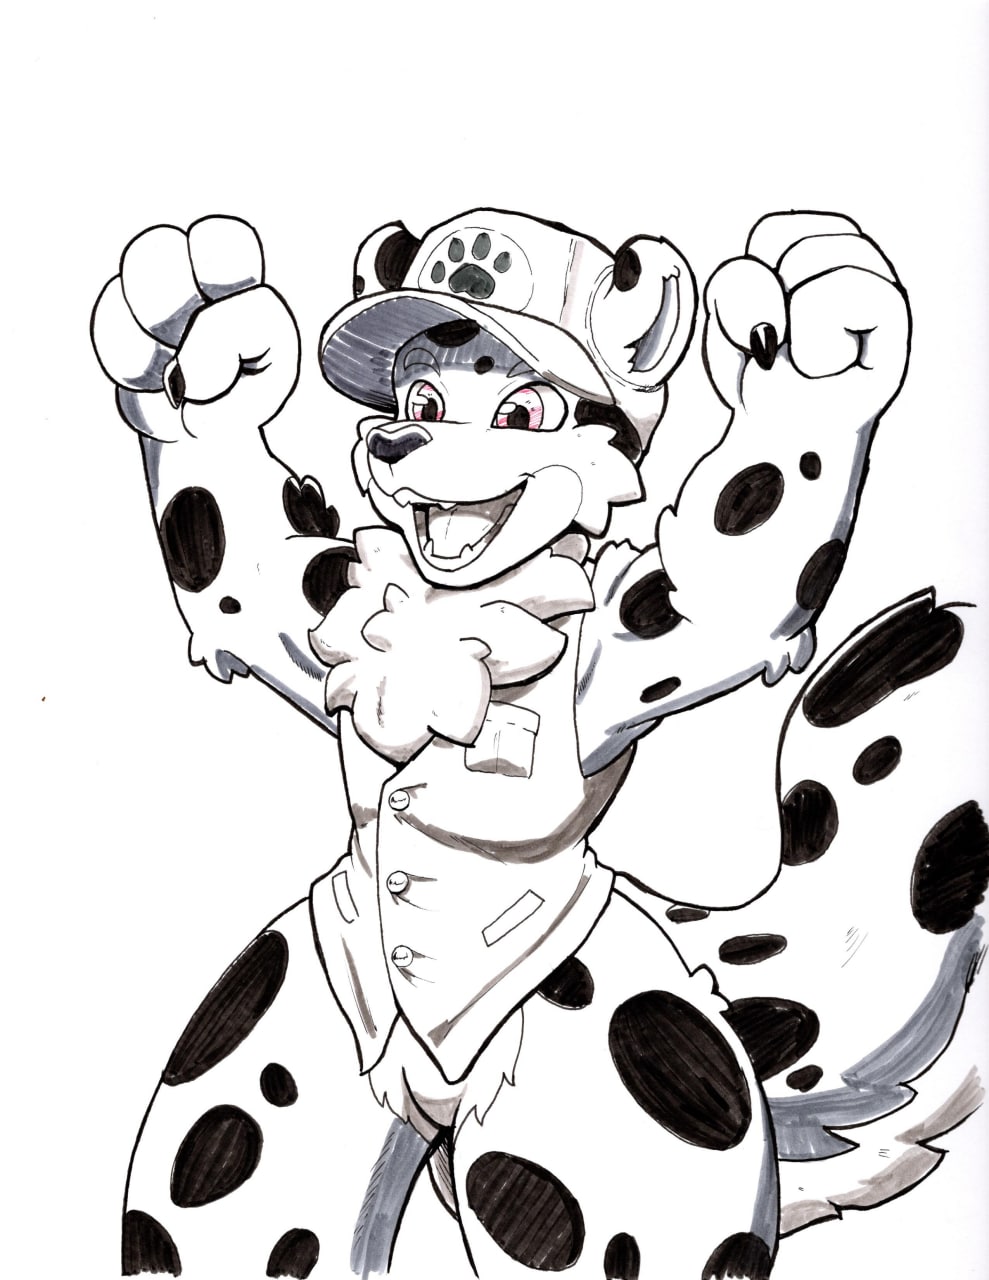 Most recent image: TFF22 - Spotted sports leopard